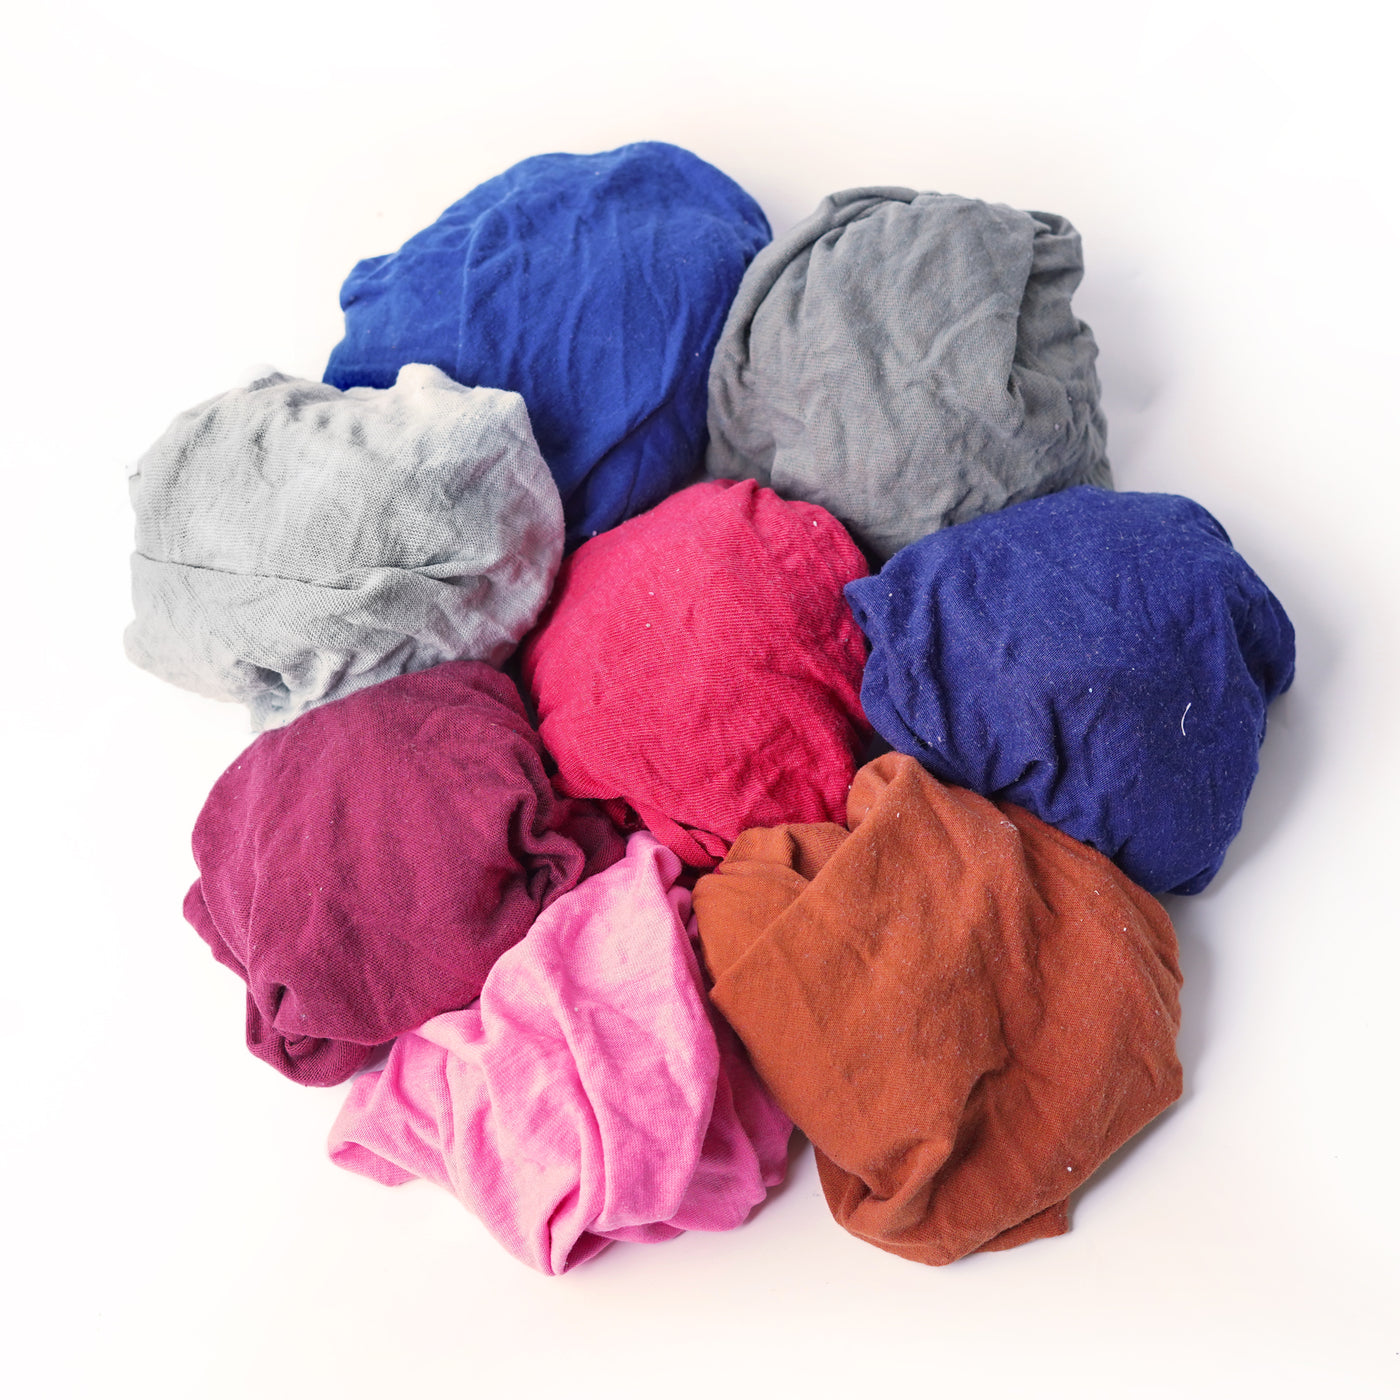 Colored T-Shirt Recycled Rags - 50 LB Box : 20-202-A